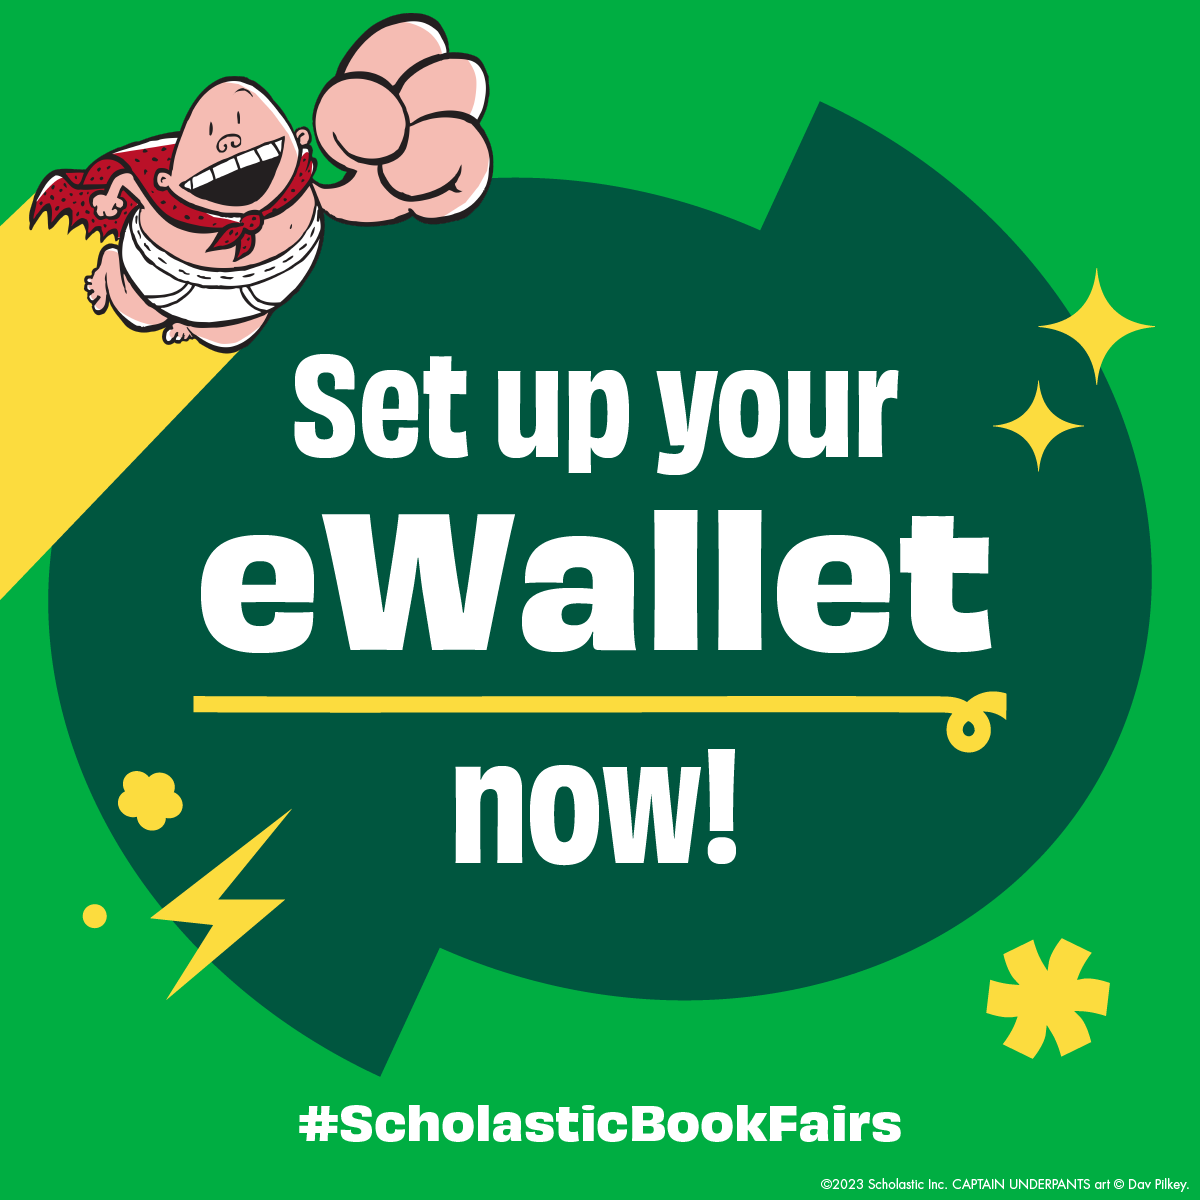 Click the image to set up an eWallet for the book fair. 